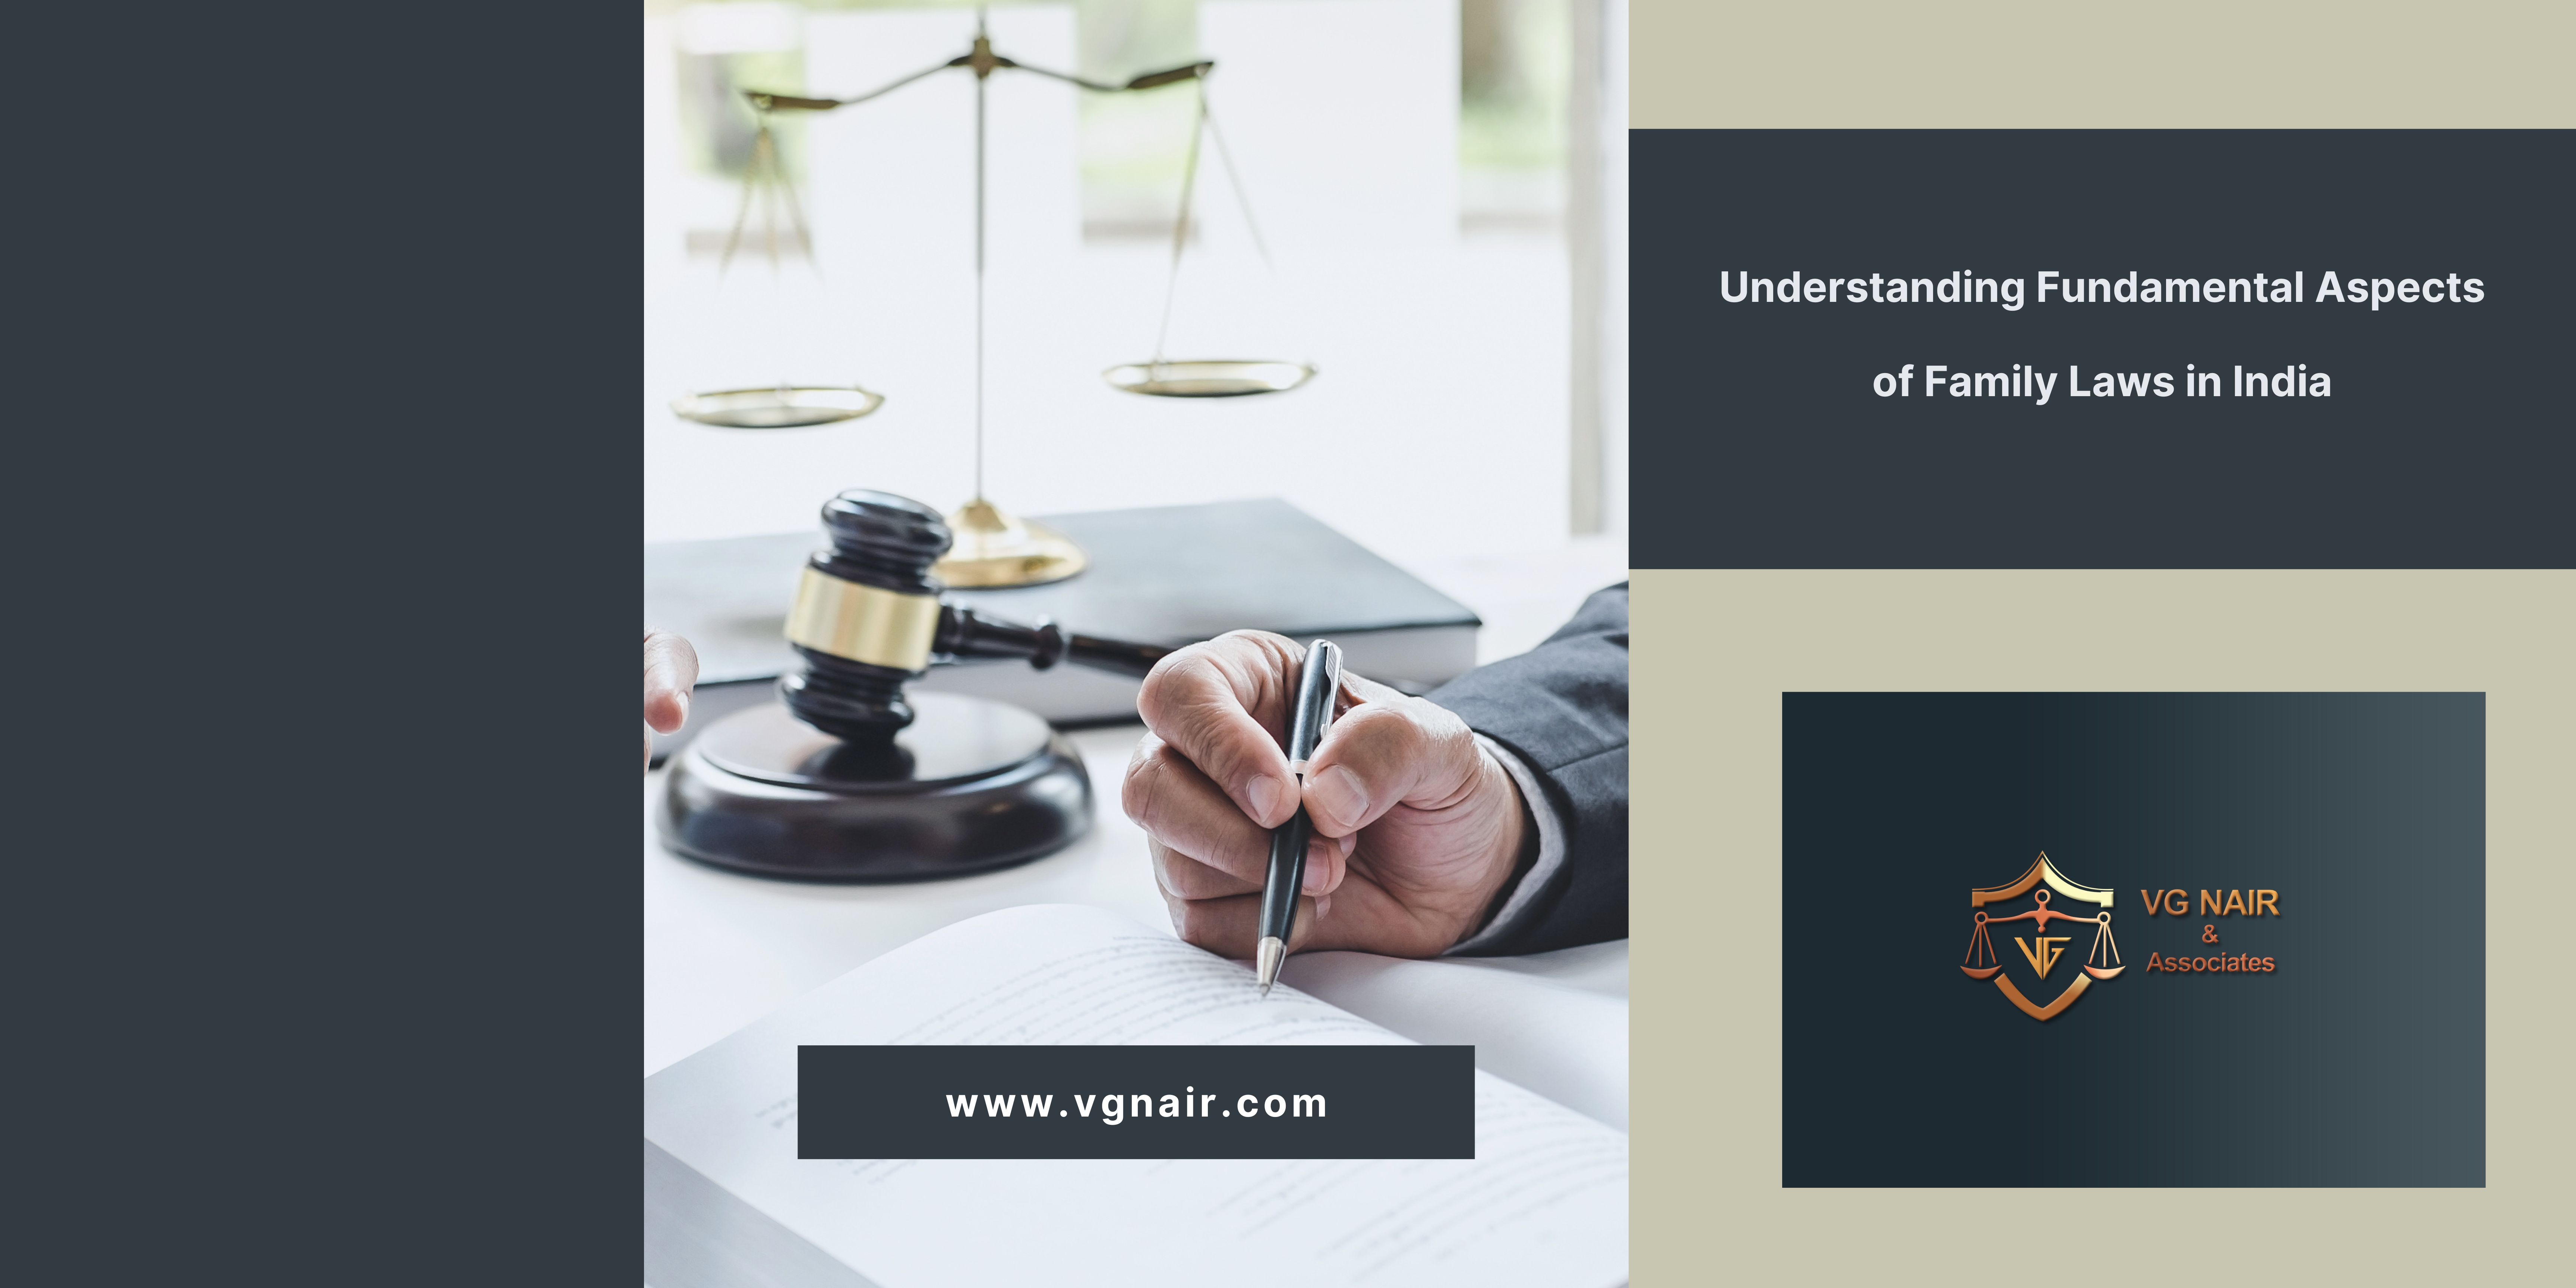 Understanding Fundamental Aspects of Family Laws in India